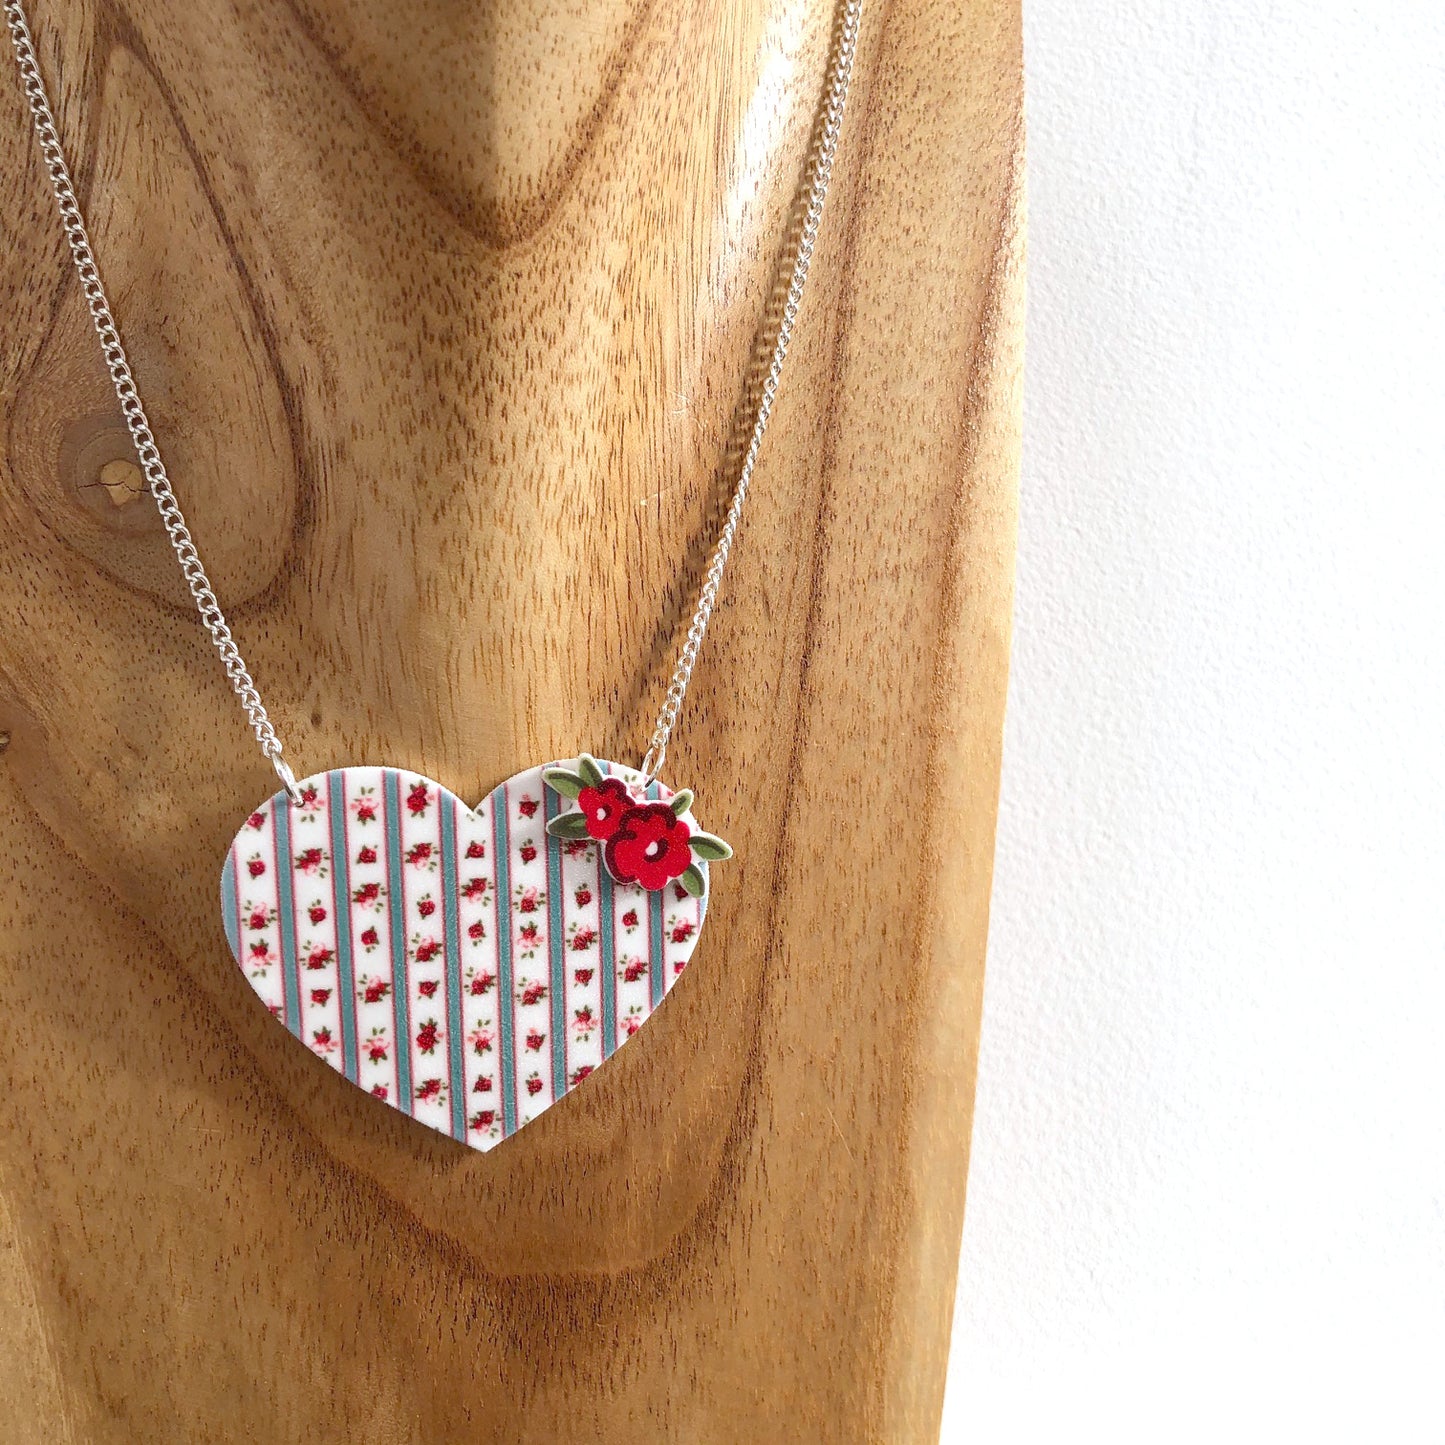 Heart pendant necklace - Roses floral necklace - Mother's Day gift